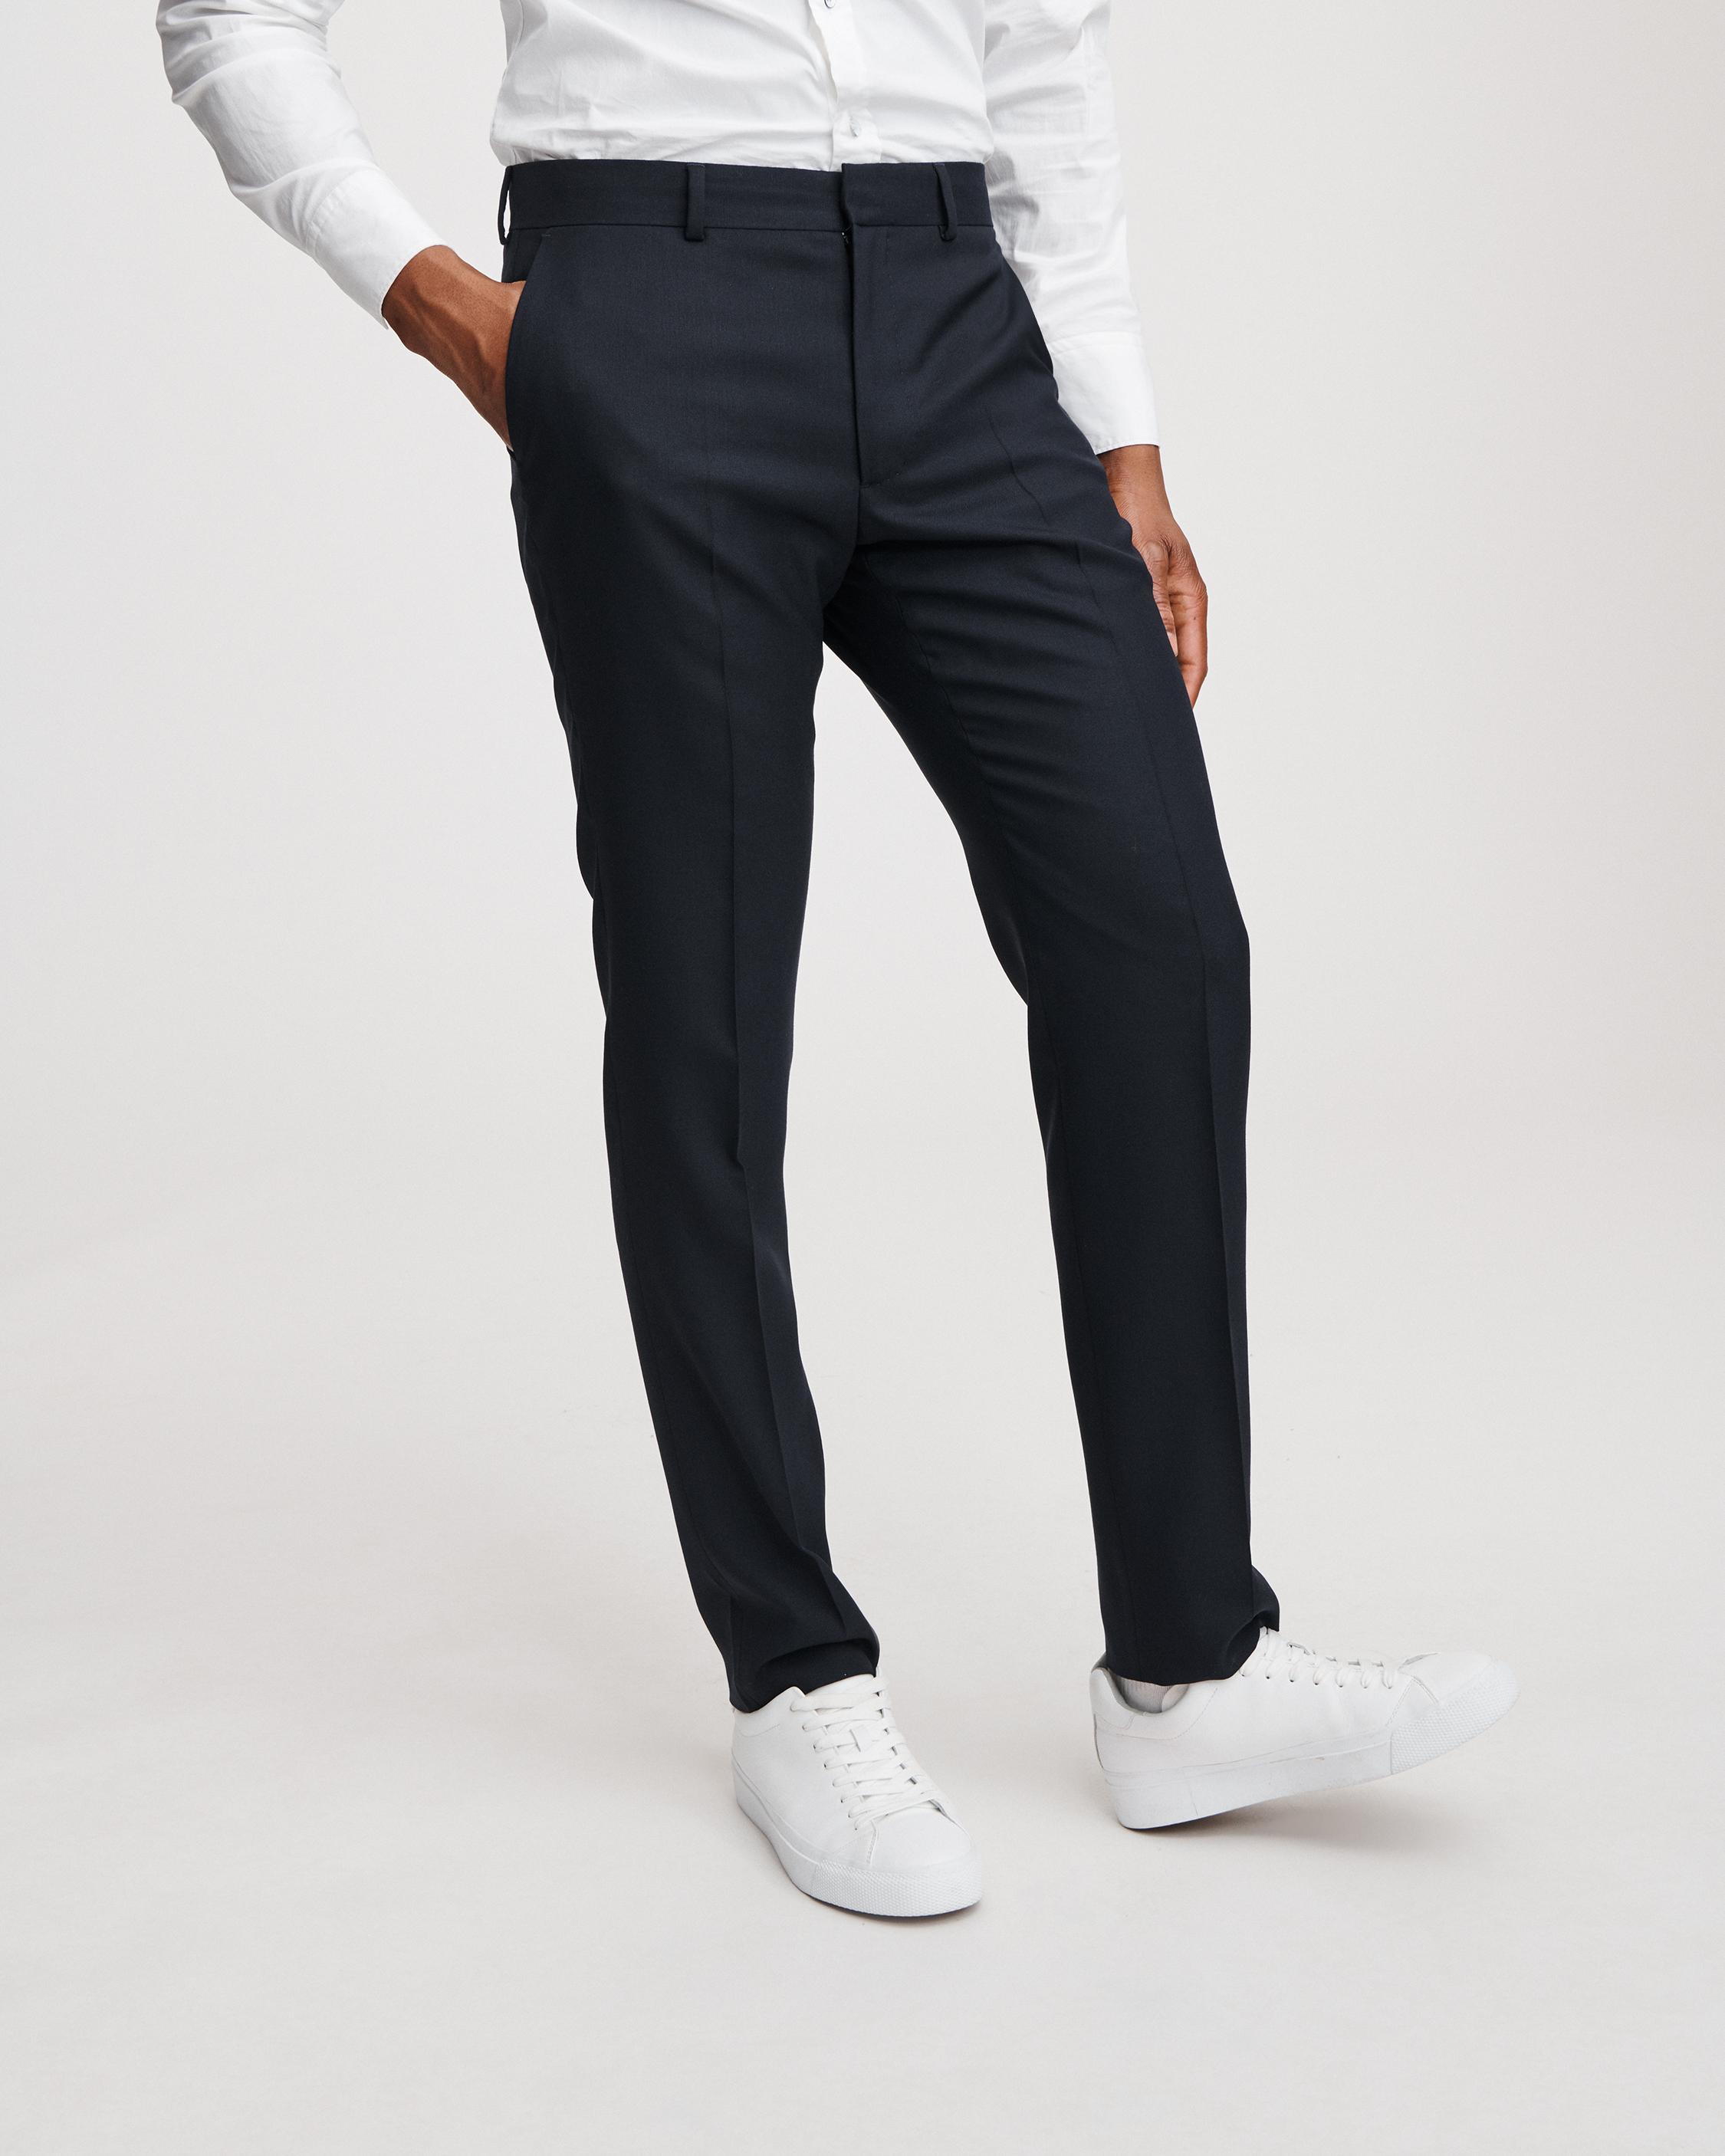 adidas men's tapered field pants